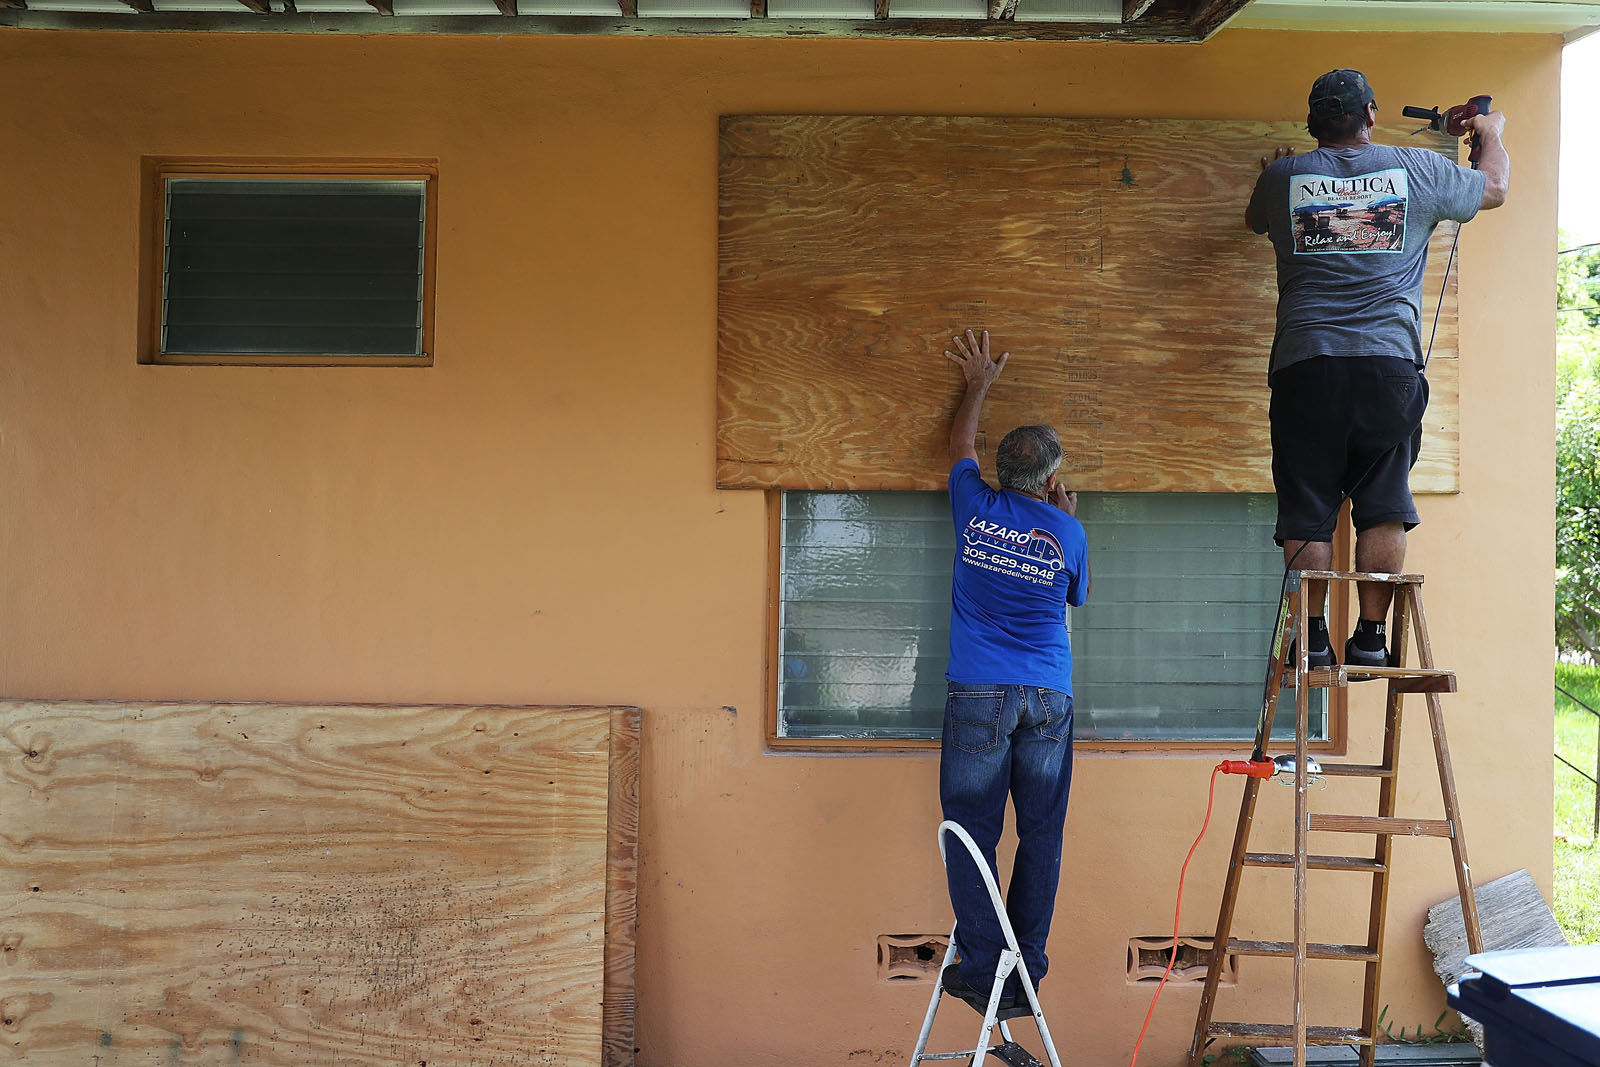 People put up shutters as they prepare a family members house for Hurricane Irma on Sept. 6, 2017 in Miami, Florida. It's still too early to know where the direct impact of the hurricane will take place but the state of Florida is in the area of possible landfall.  (Photo by Joe Raedle/Getty Images)